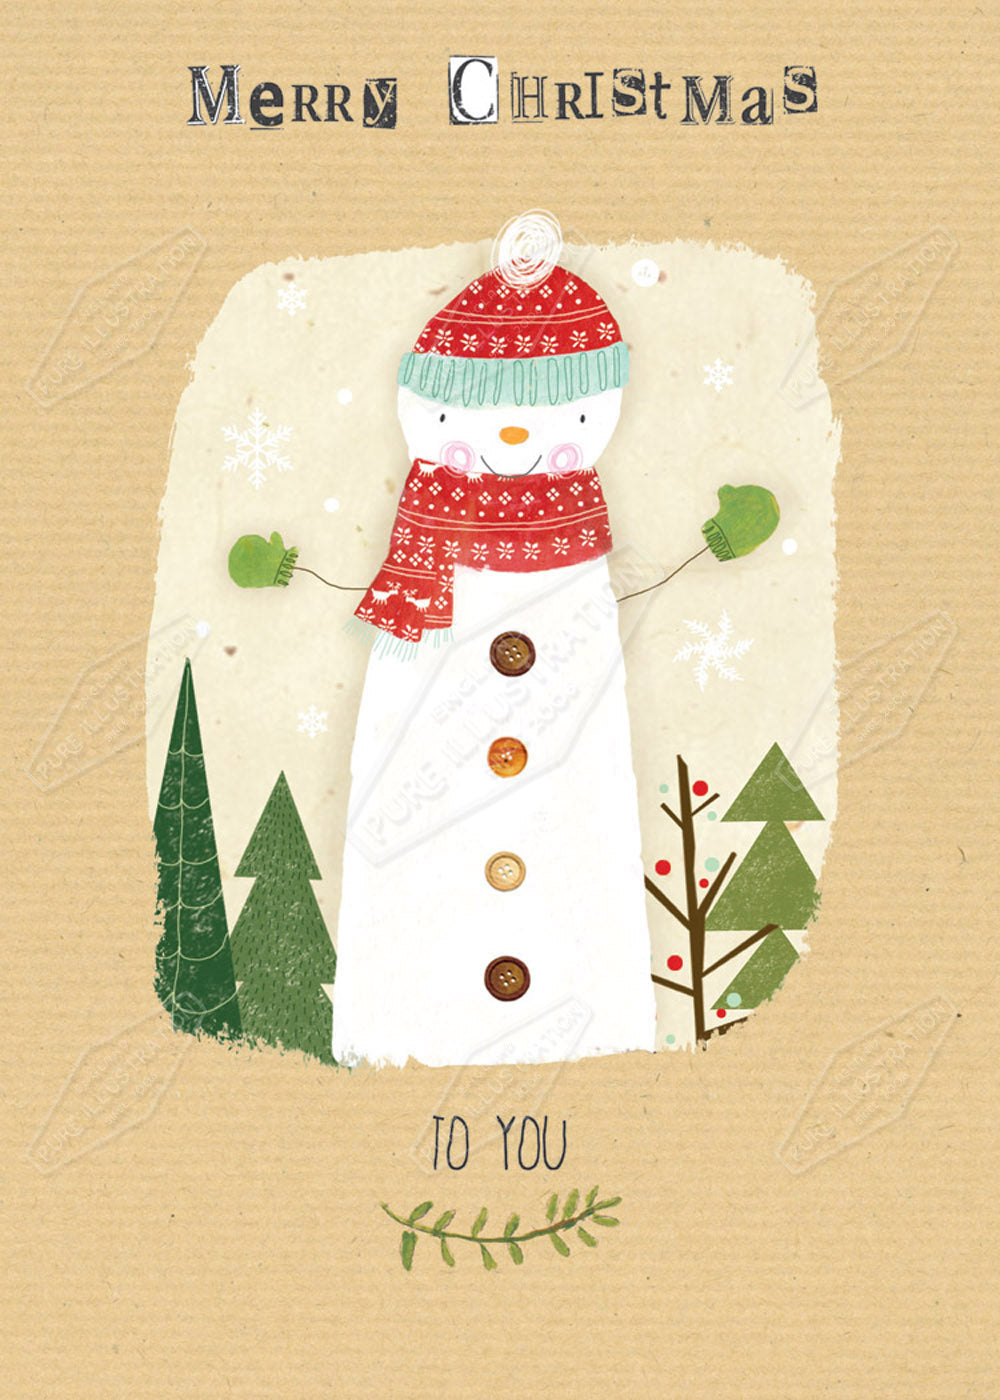 00029586CRE - Snowman Greeting Card Design by Cory Reid for Pure Art Licensing Agency & Surface Design Studio